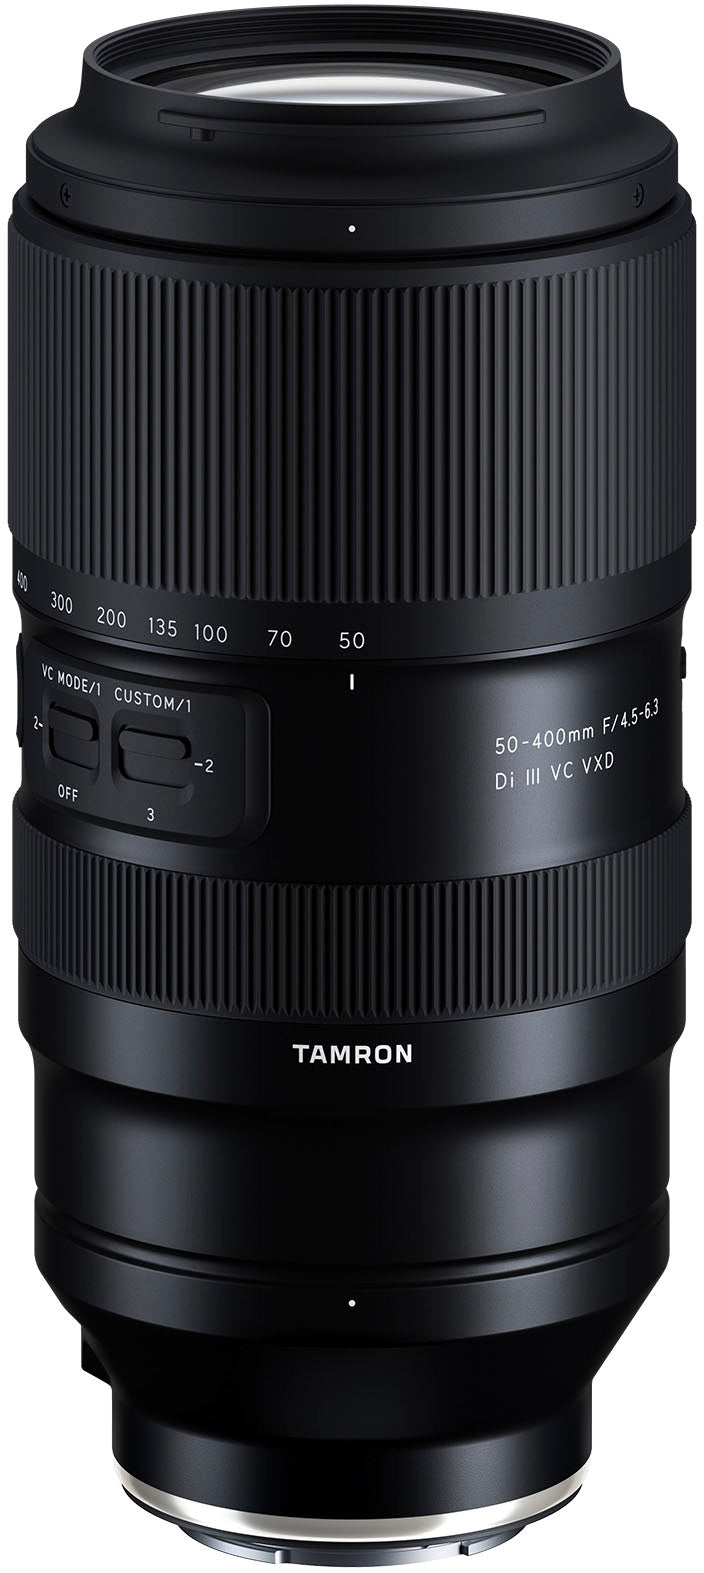 Tamron - 50-400mm F/4.5-6.3 DI III VC VXD Telephoto Zoom Lens for SonyFull-frame  E-Mount Cameras_0